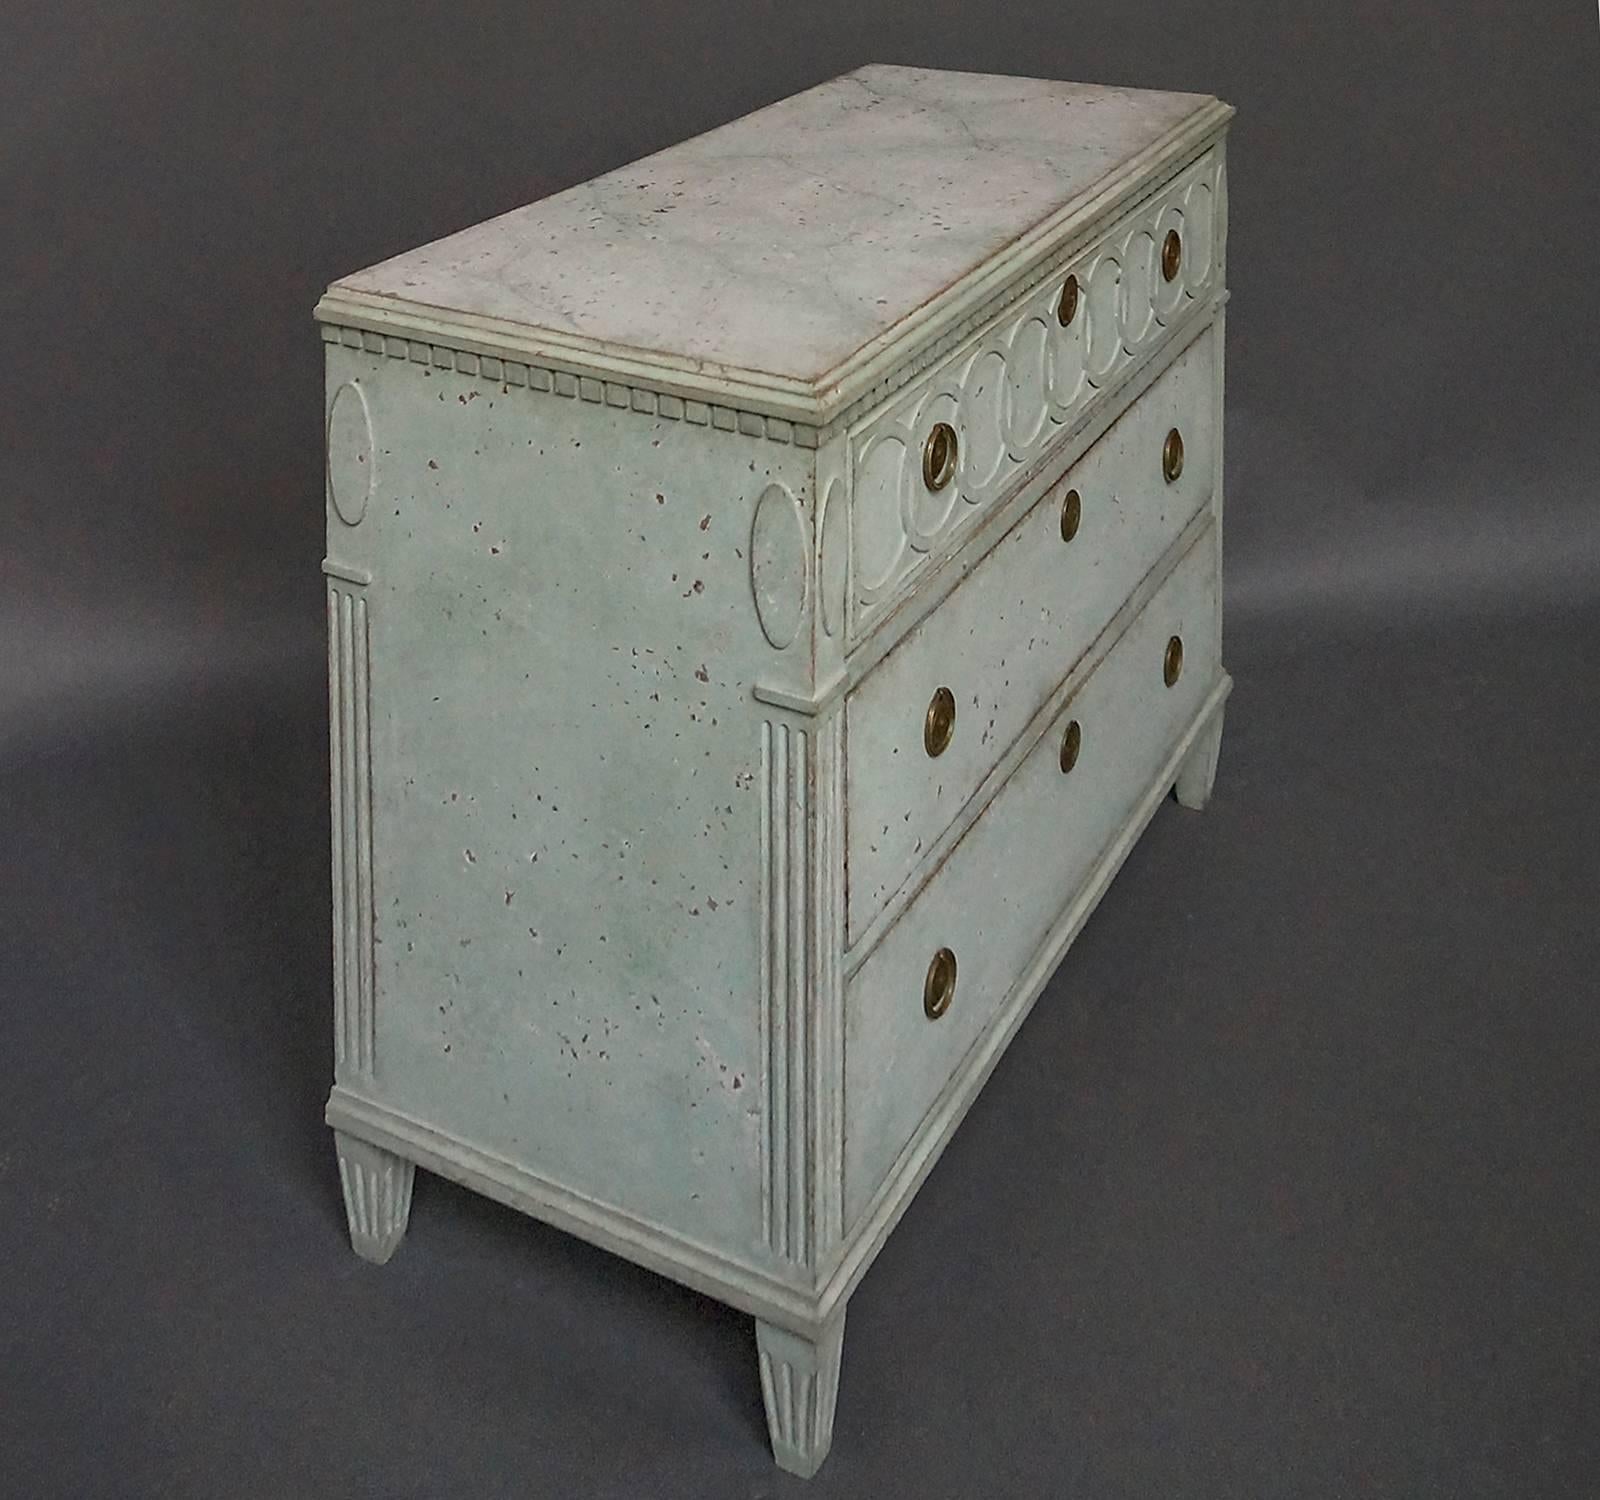 Swedish chest of drawers, circa 1860, in pale green paint with faux marble top. A frieze of interlocking rings on the front of the top drawer, dentil molding around the top, and reeded corner posts with raised ovals at the top. Tapering square legs